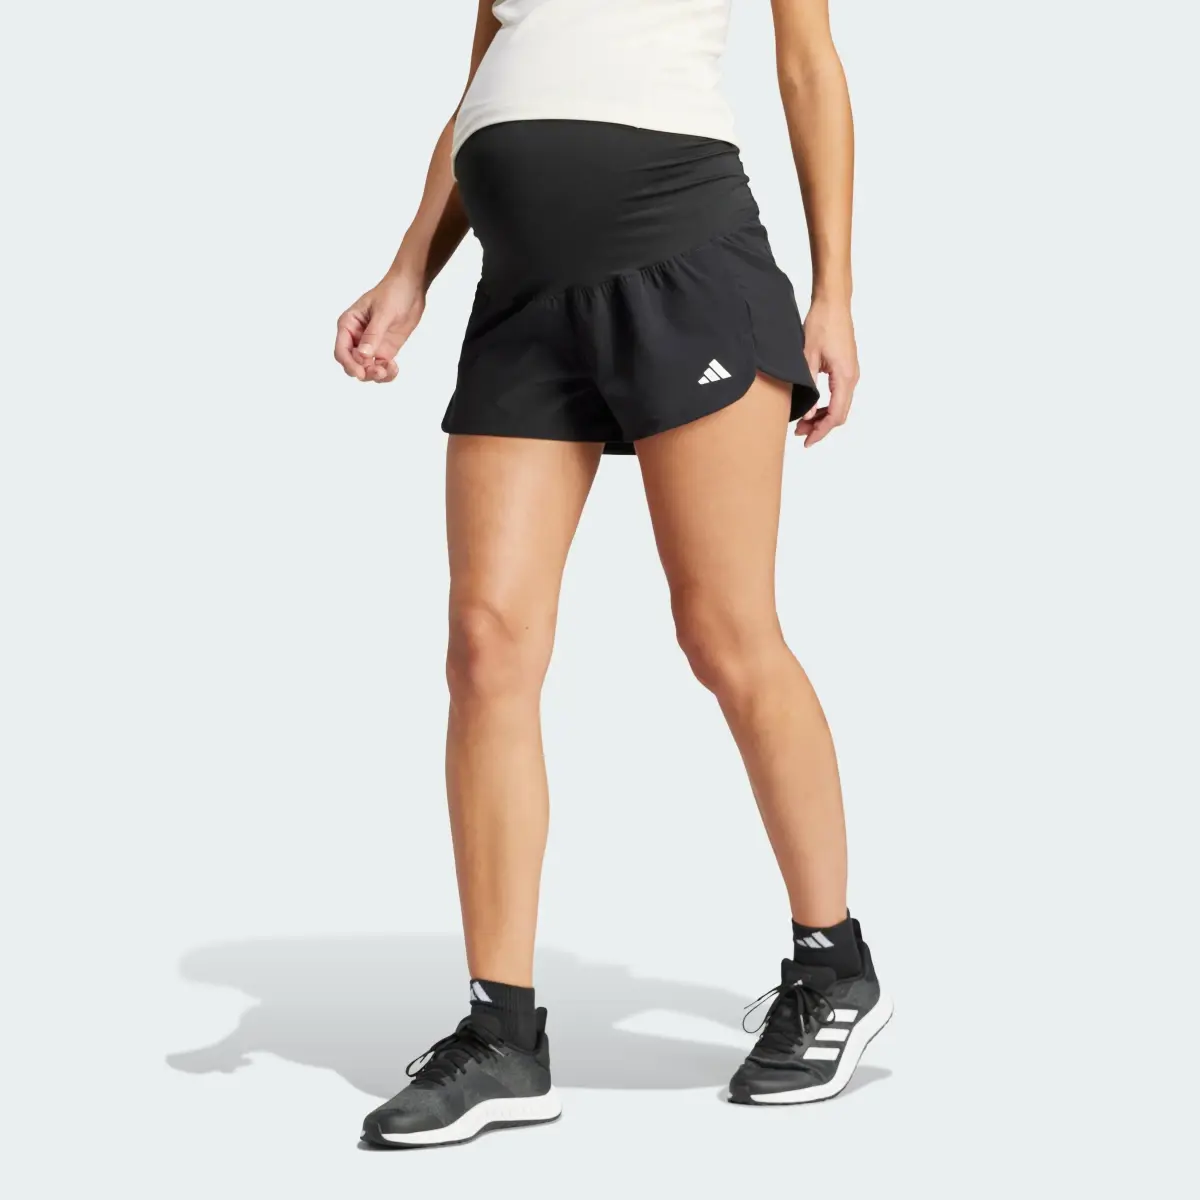 Adidas Pacer Woven Stretch Training Maternity Shorts – Umstandsmode. 2